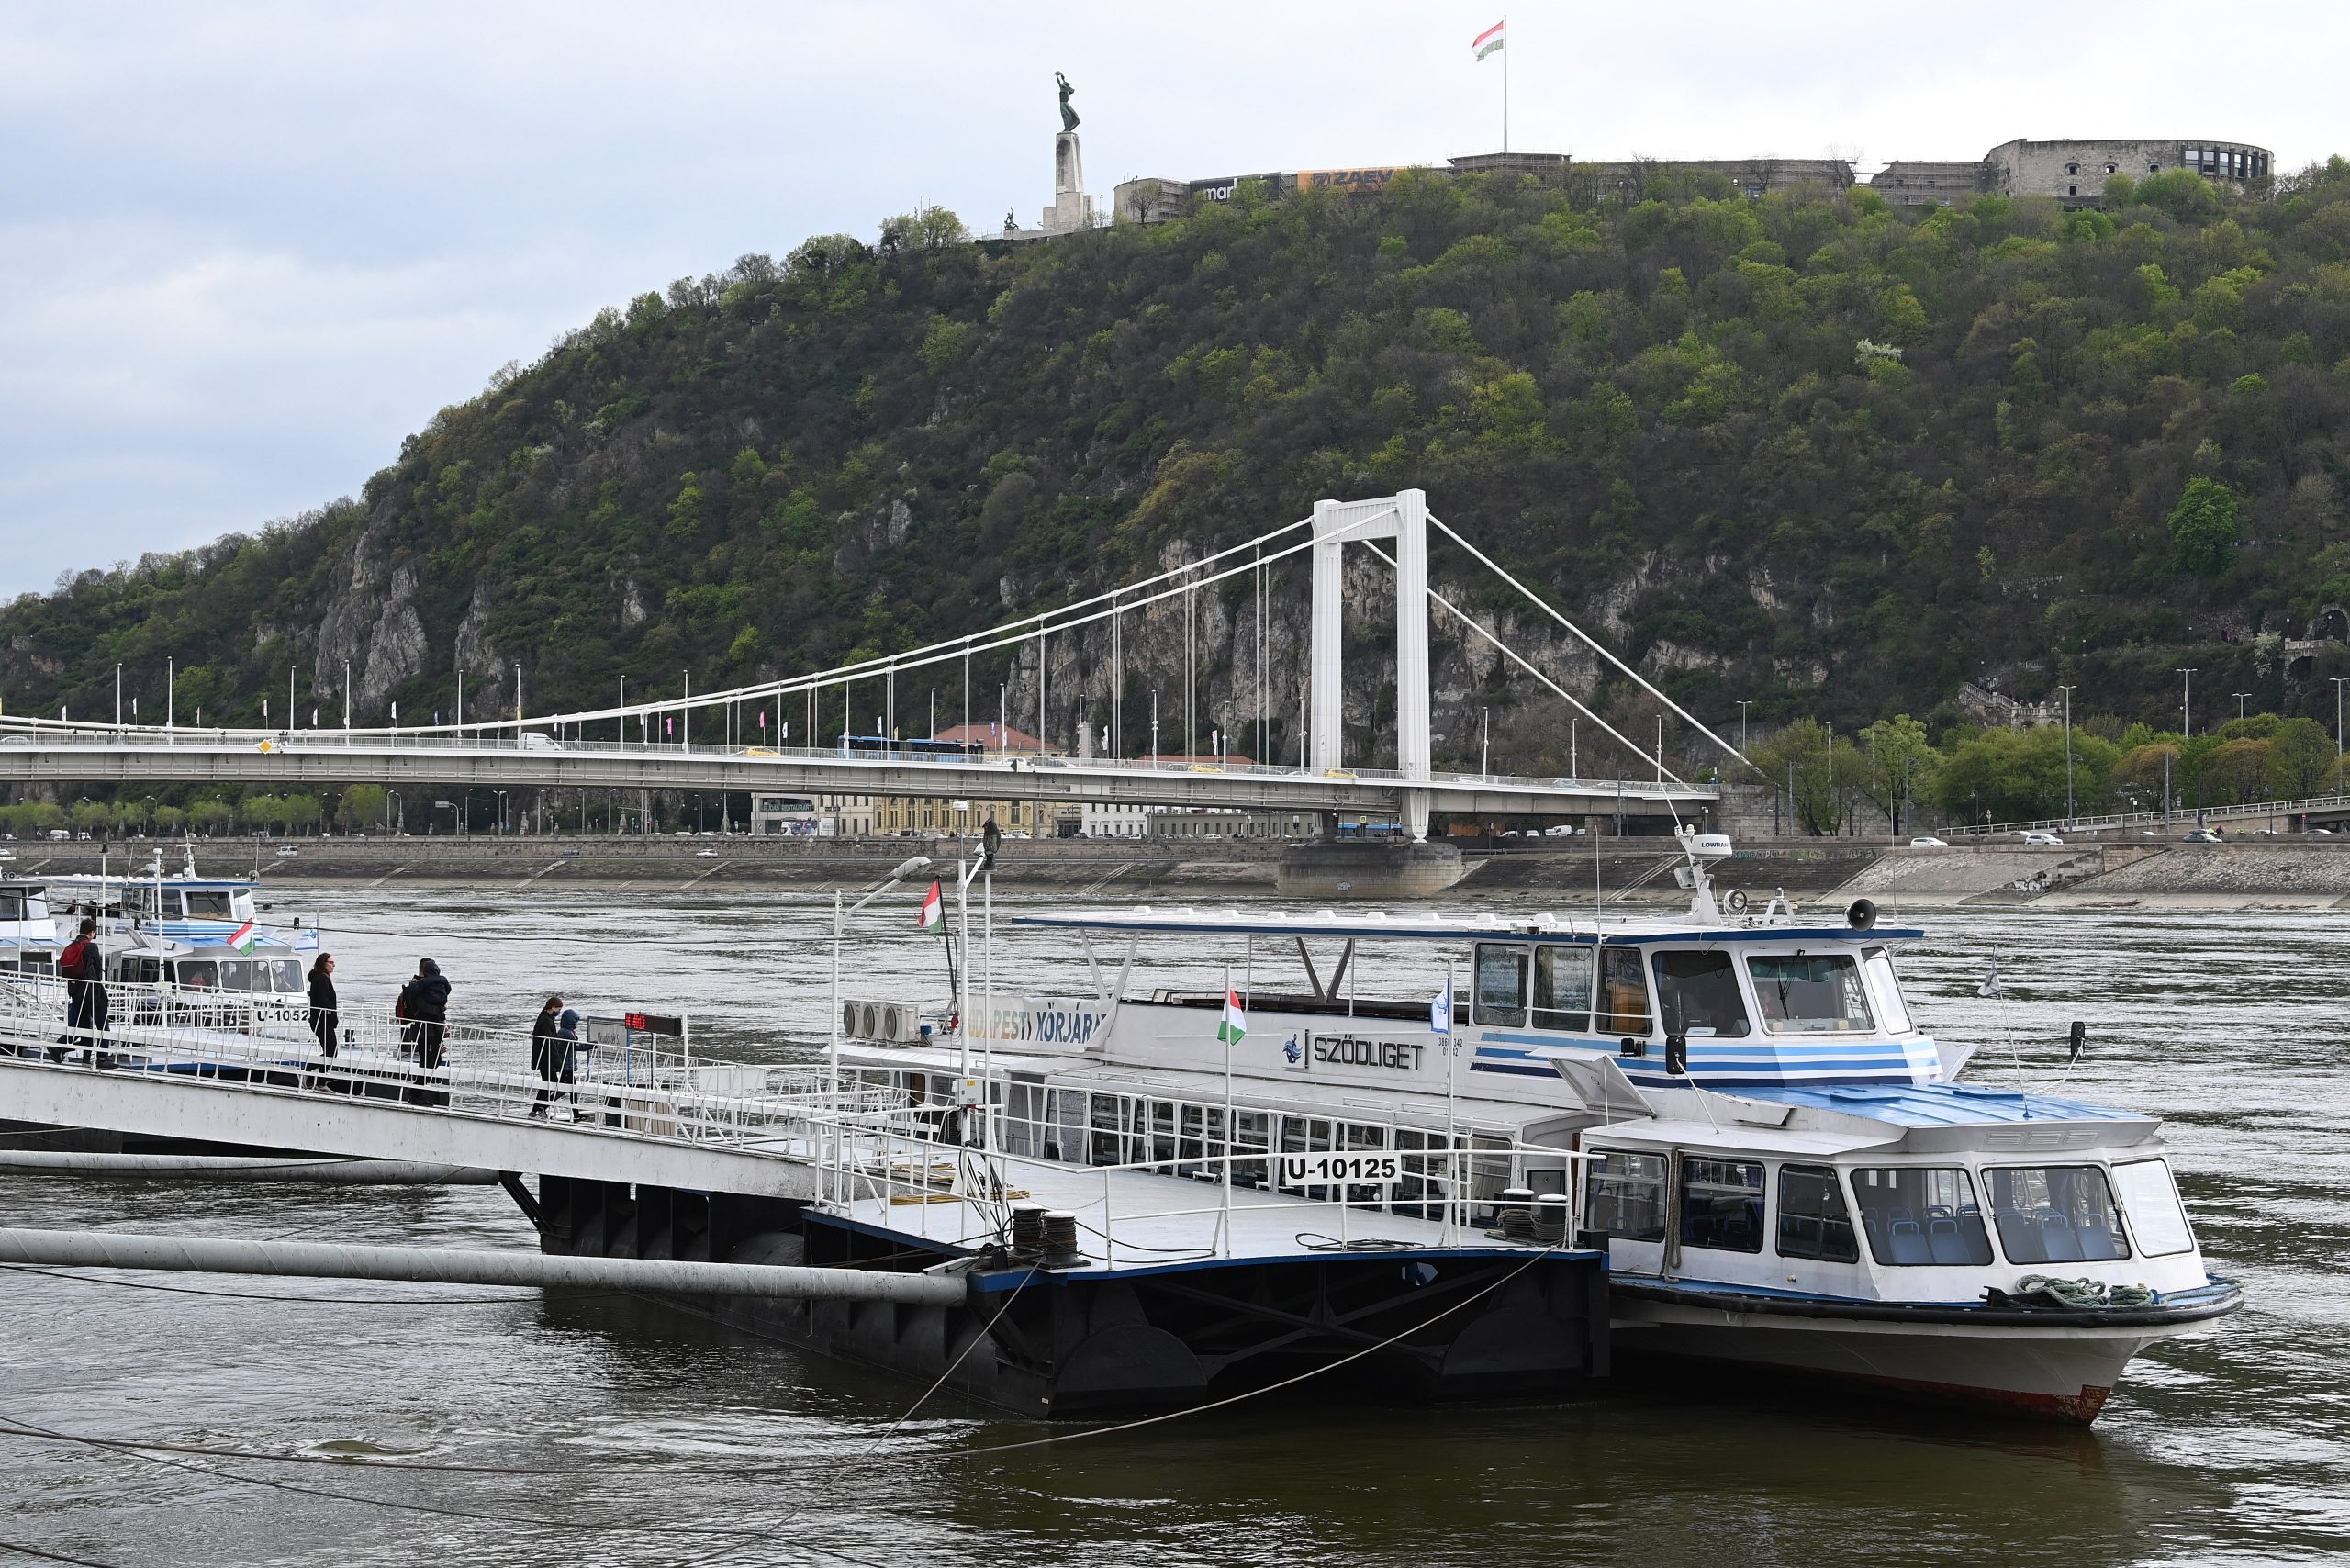 Scheduled Boat Services on Budapest Section of Danube to Restart from April 29